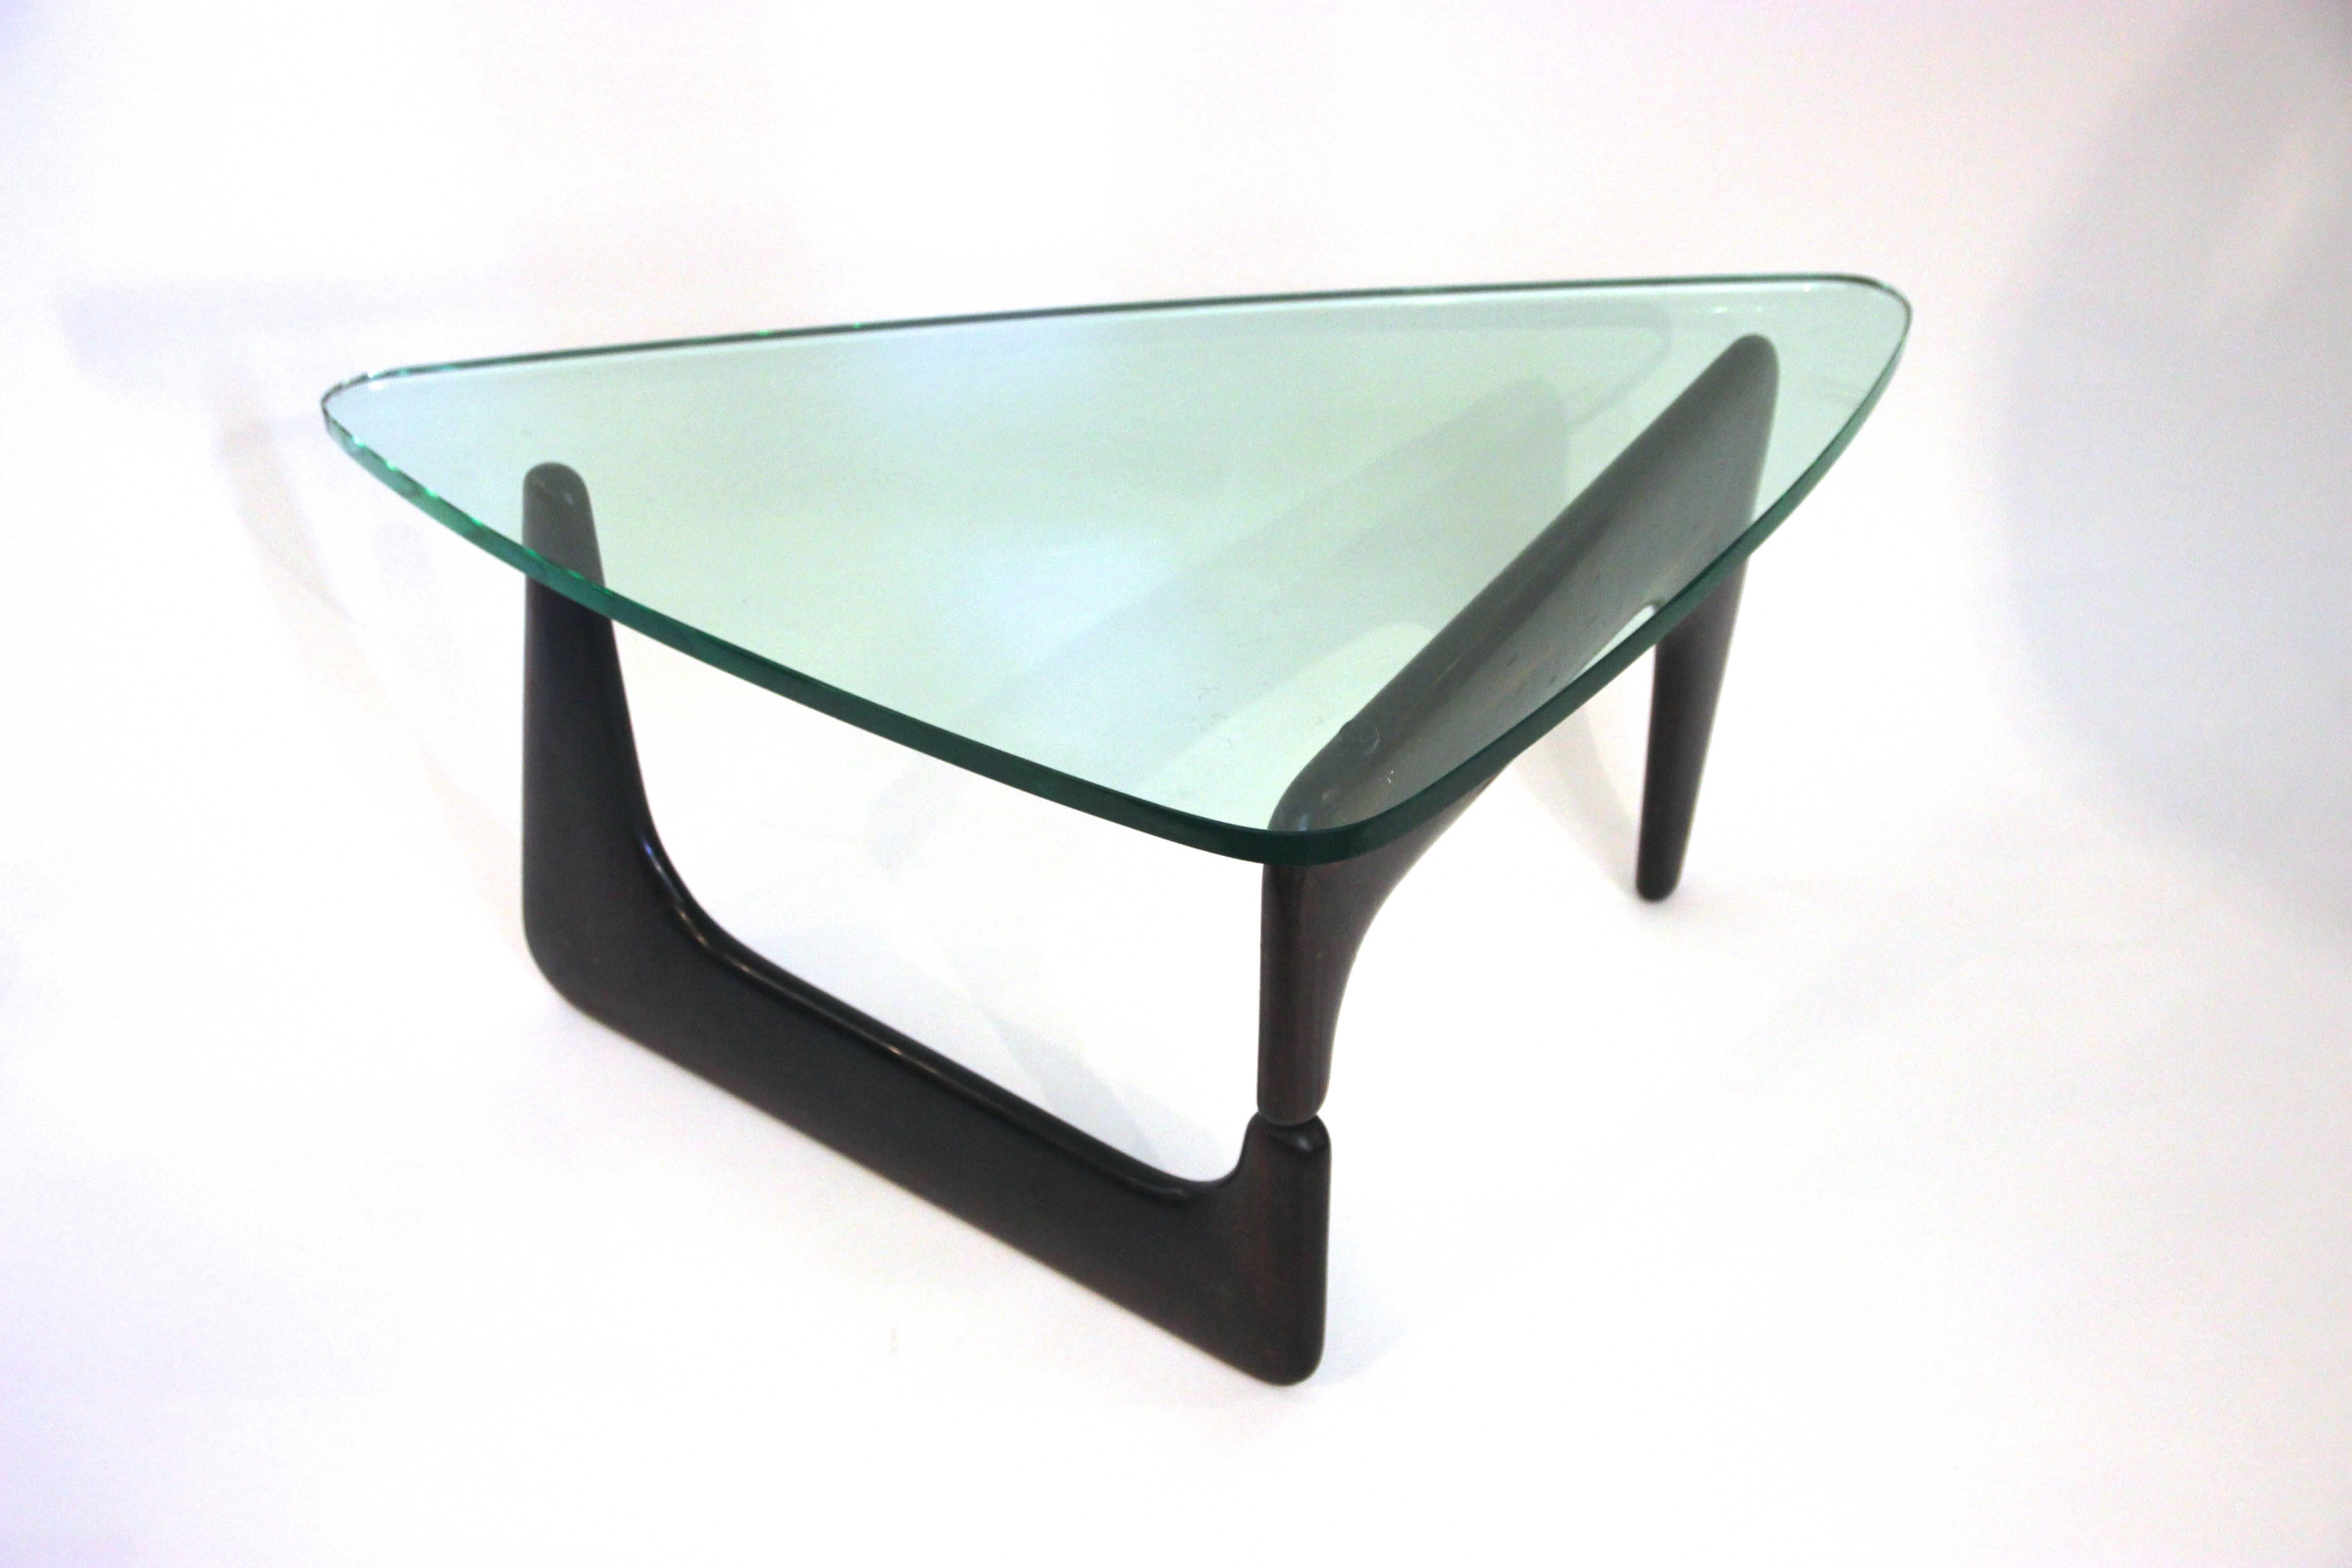 Style of Isamu Noguchi for Herman Miller,
IN-50 coffee table,
Glass tray and wooden base,
circa 1960, USA.
Measures: Height 41 cm, width 59 cm, depth 95 cm.